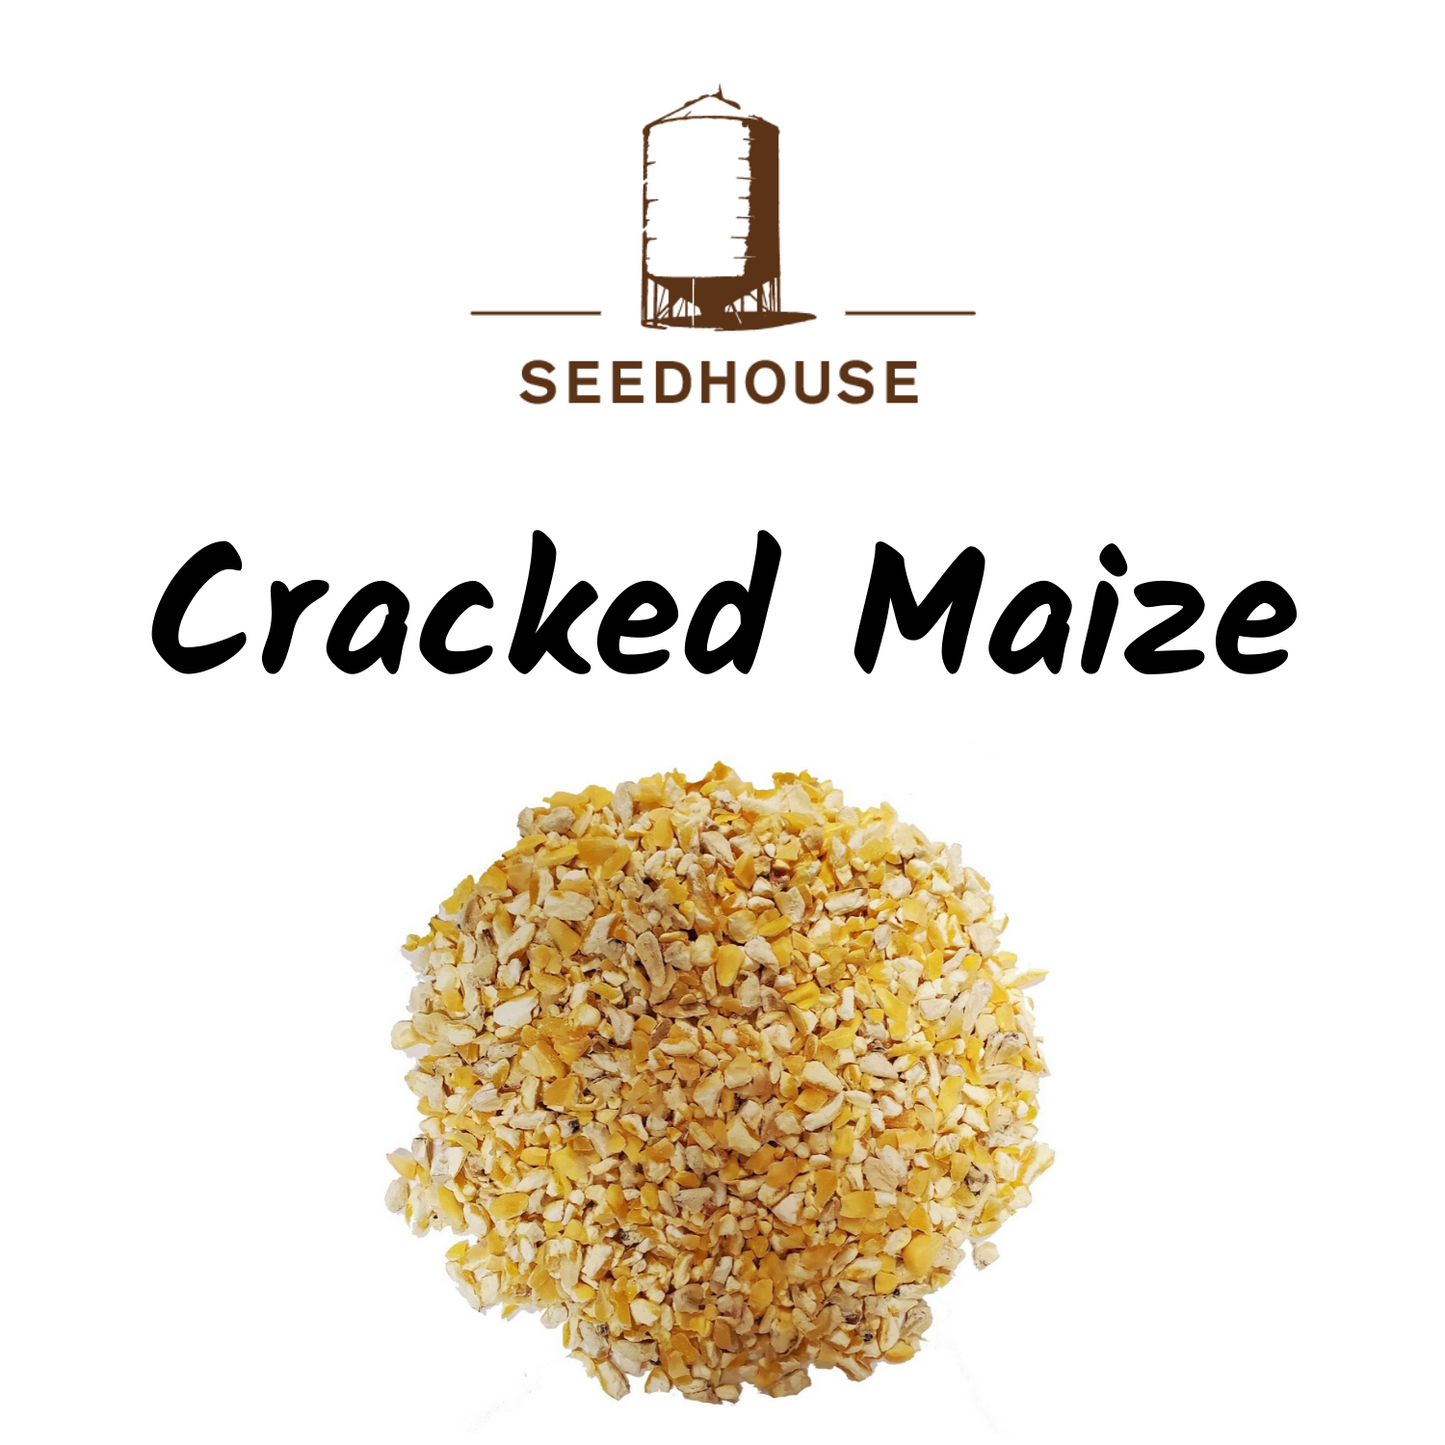 SEEDHOUSE CRACKED MAIZE 20KG